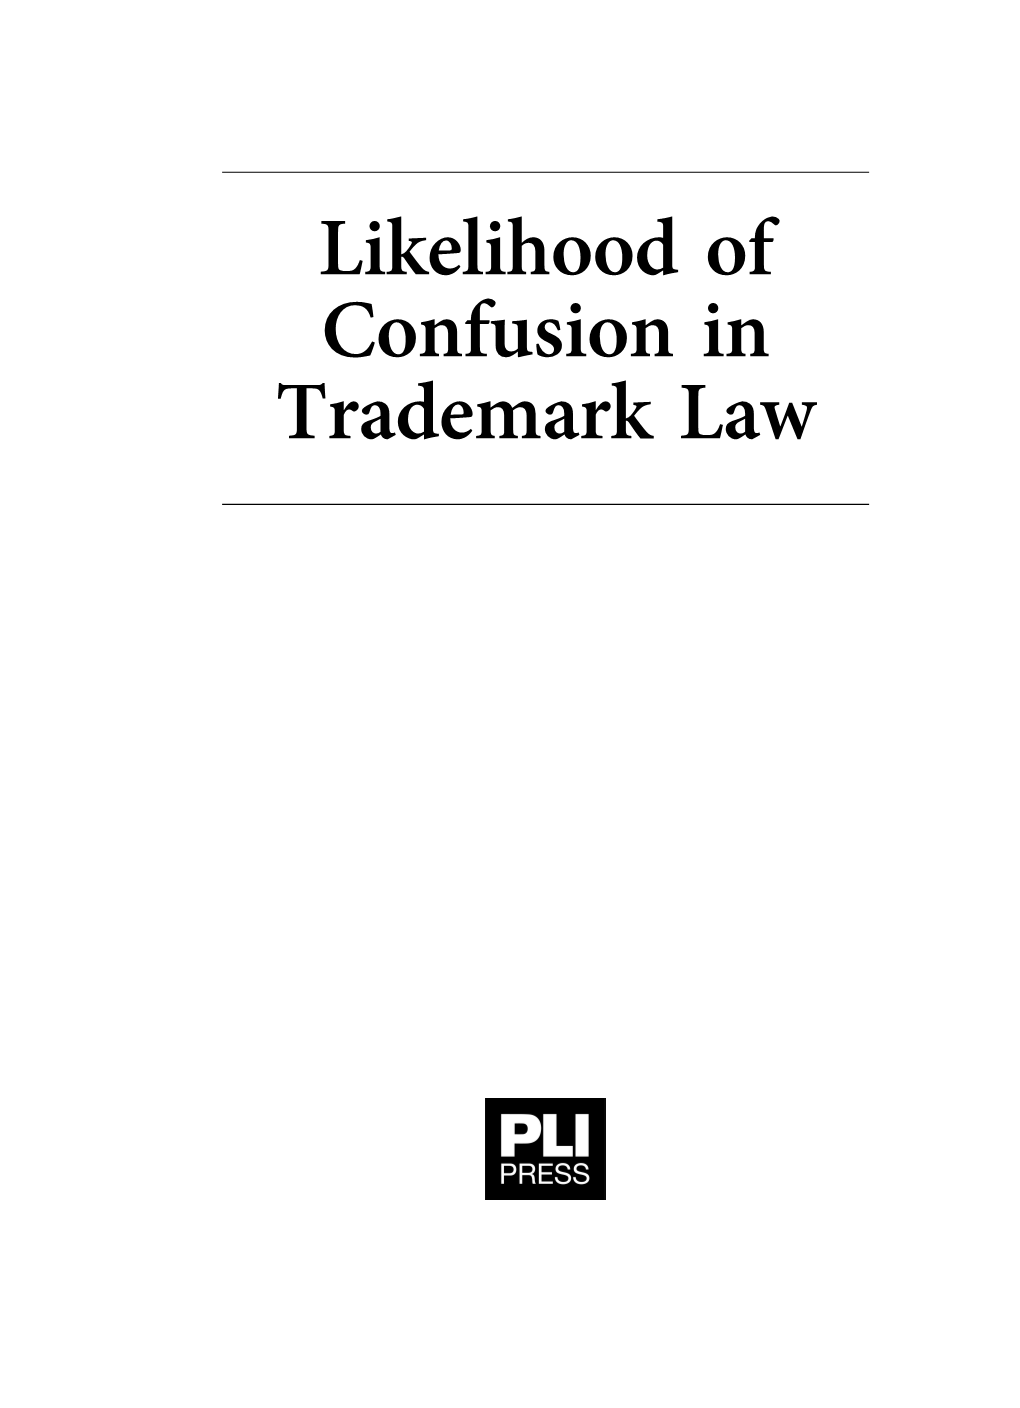 Likelihood of Confusion in Trademark Law PLI's Complete Treatise Library (Standard Page Size).Fm Page I Wednesday, September 5, 2018 3:57 PM